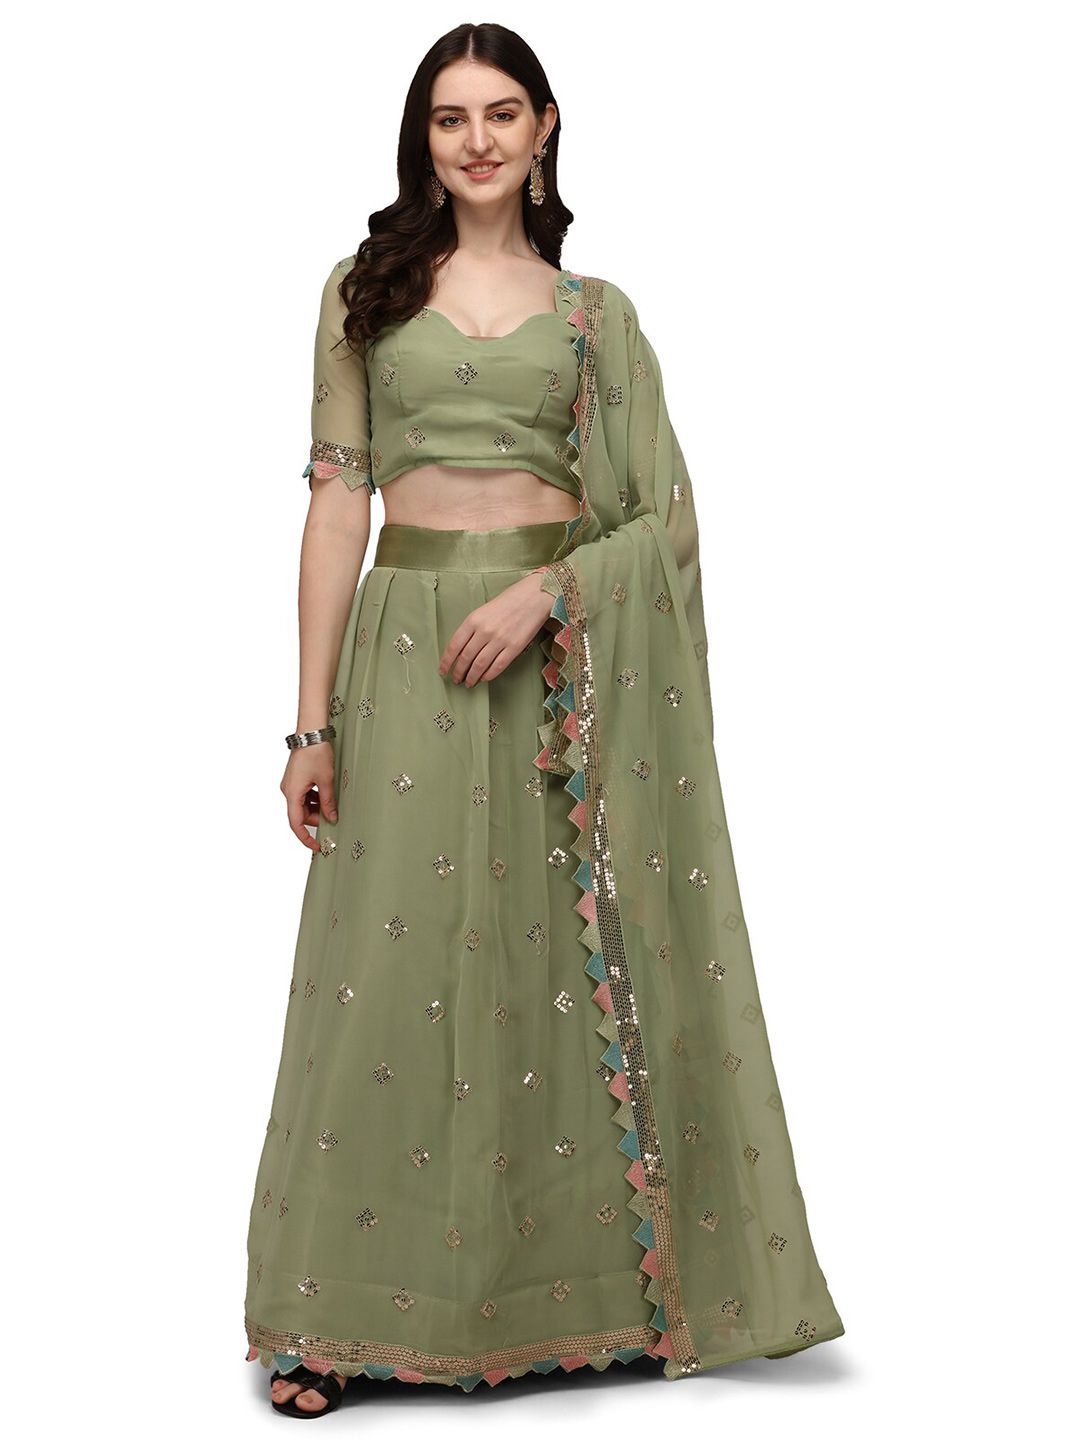 Pratham Blue Olive Green & Golden Sequinned Semi-Stitched Lehenga & Unstitched Blouse With Price in India